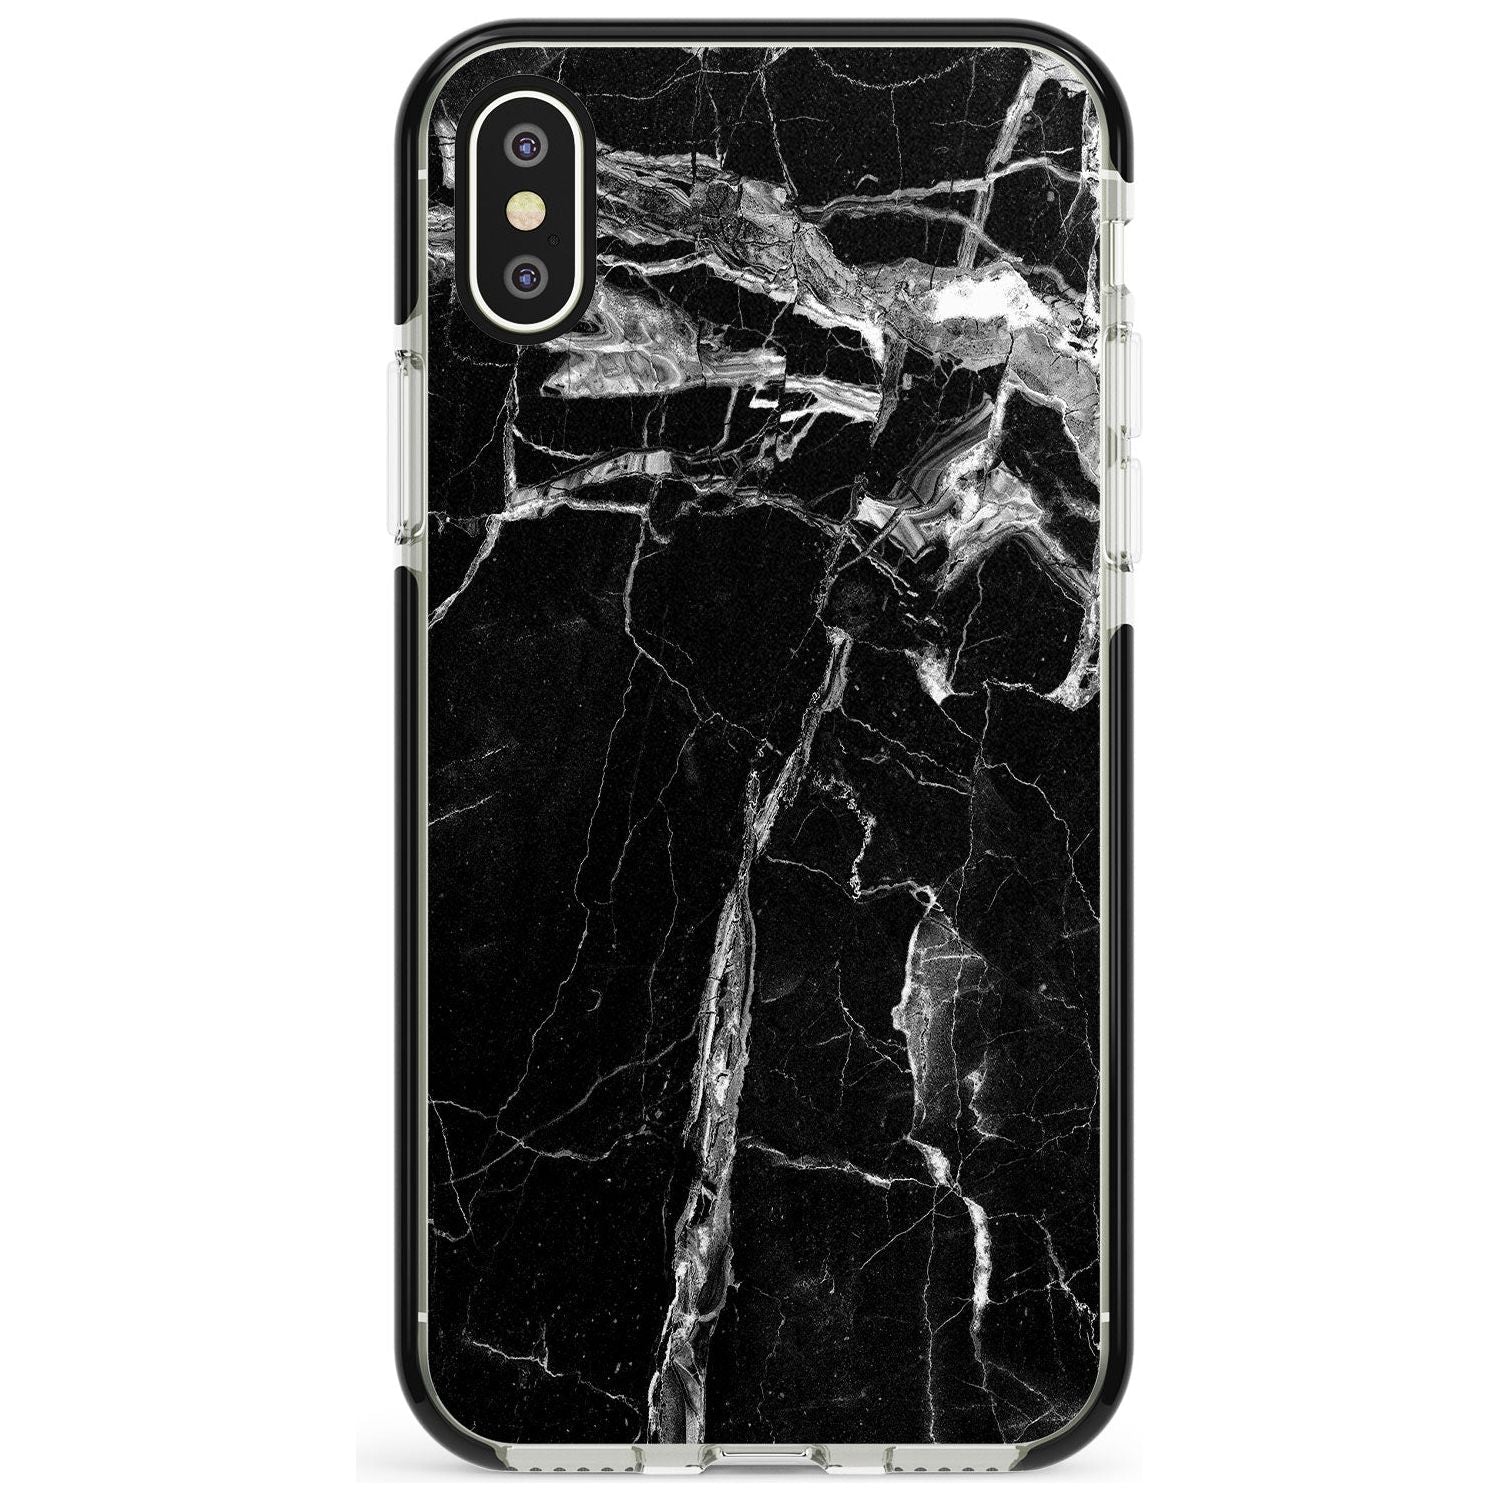 Black Onyx Marble Texture Pink Fade Impact Phone Case for iPhone X XS Max XR